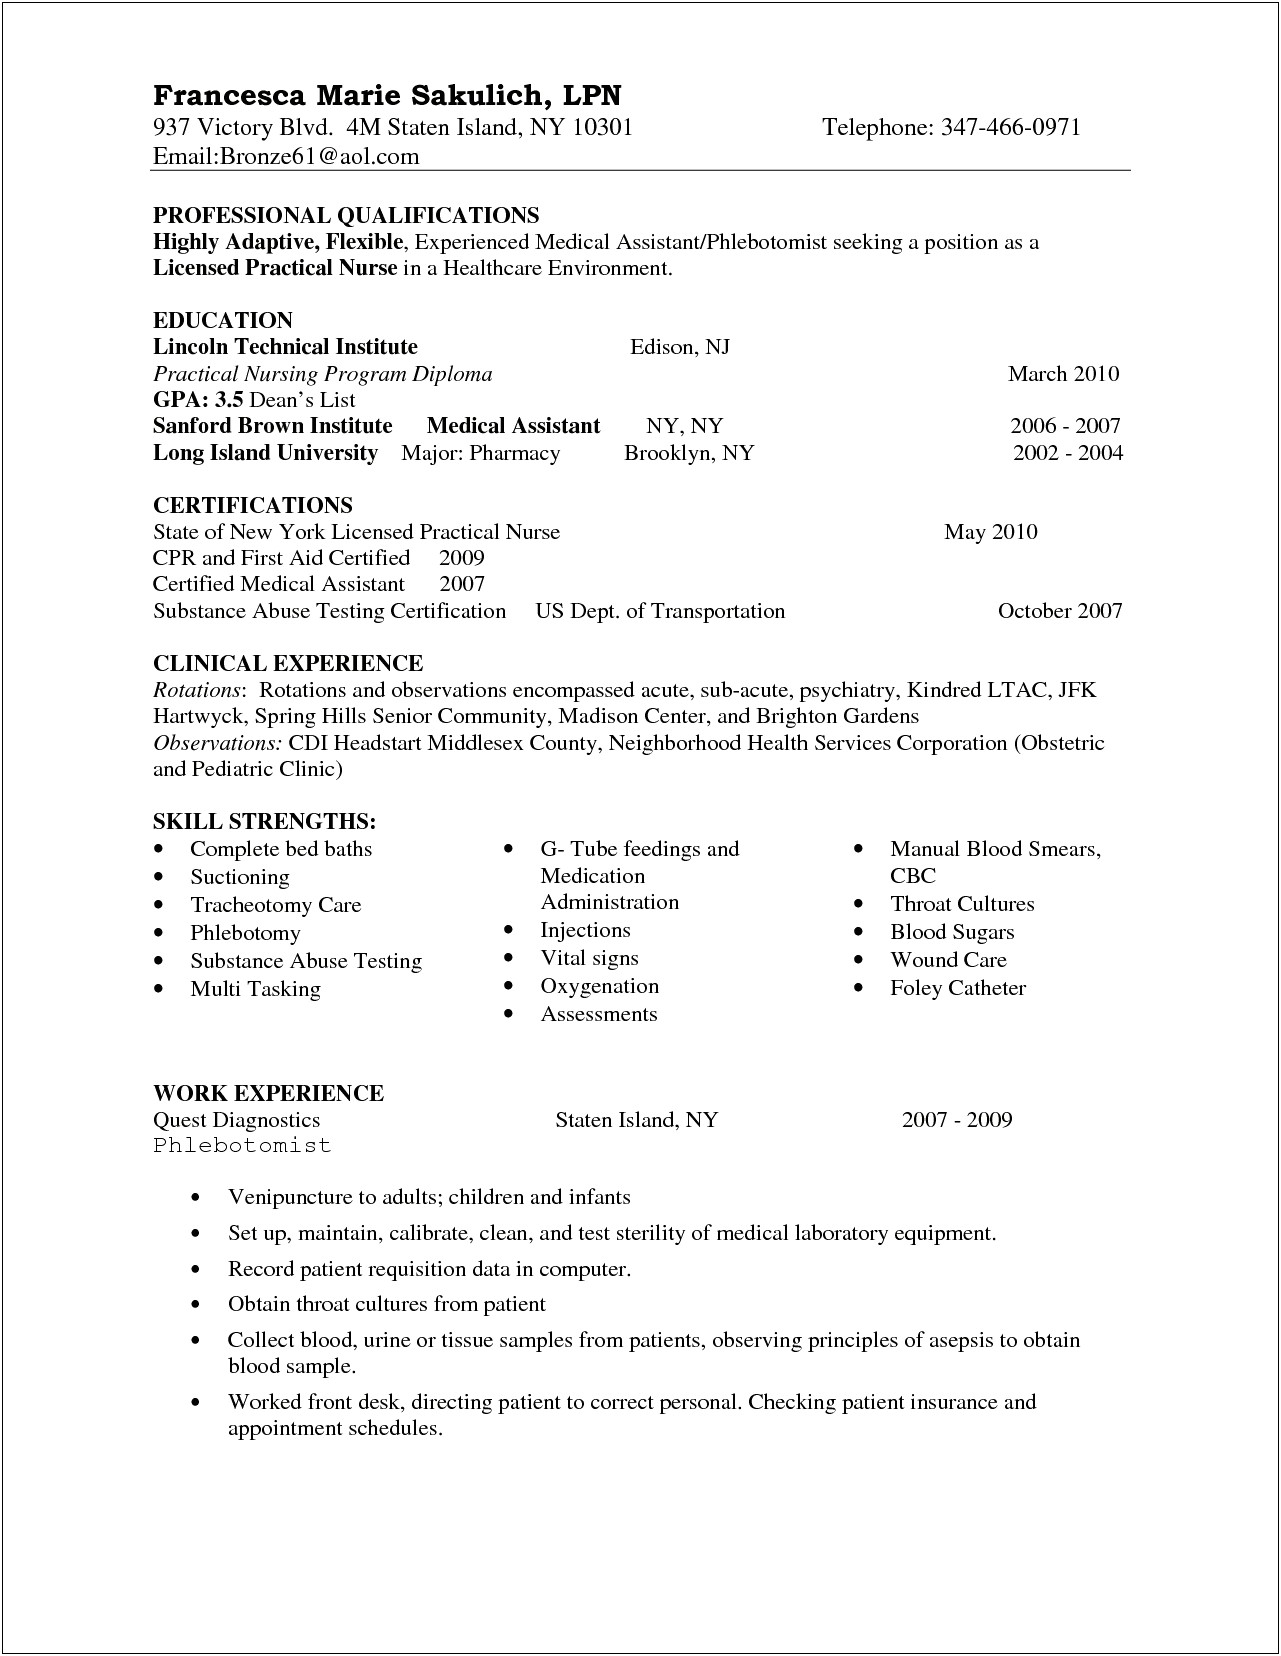 Resume Objective For A Substance Abuse Tech